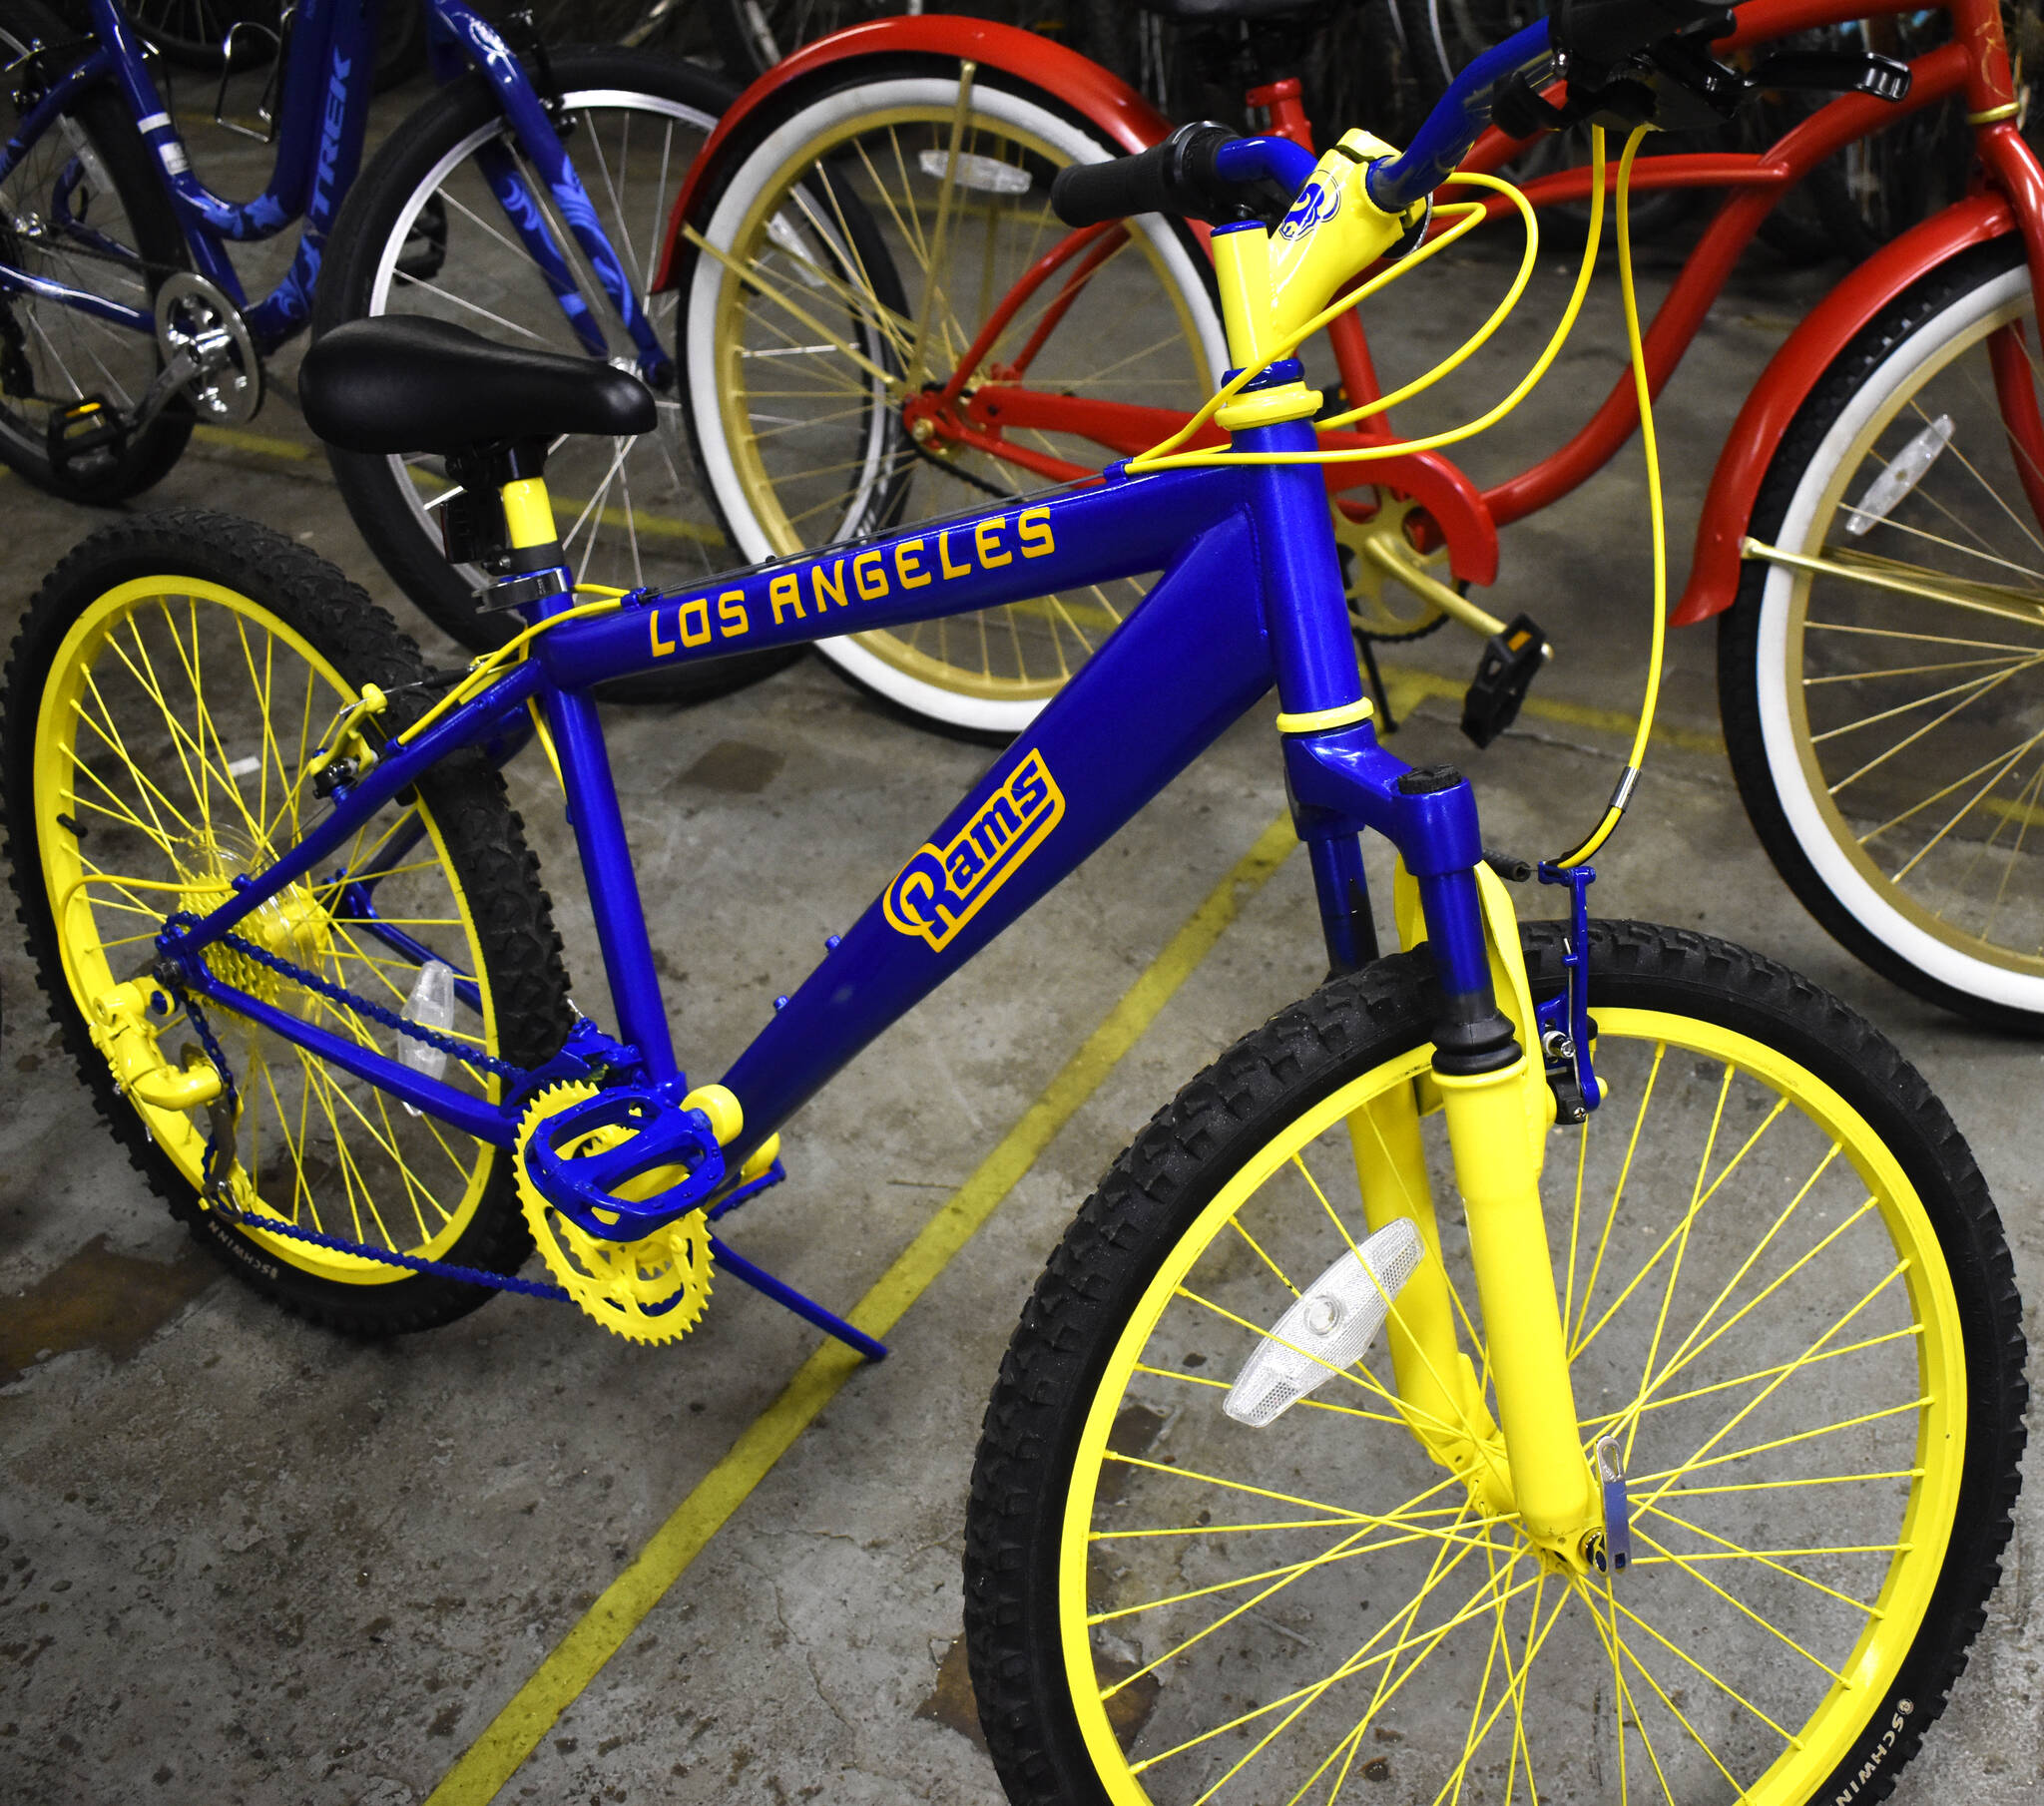 Matthew N. Wells / The Daily World 
This bike, painted the colors of the NFL’s Los Angeles Rams, was one of the many bicycles on Saturday afternoon that stood out to the Aberdeen Lions Club members and the parents who showed up to pick the bikes to gift their children and teens at Christmas. This bike shows one example of the craftsmanship and artistry that the inmates possess at Stafford Creek Corrections Center. The inmates fixed up the old bikes intended for children and teens. Kelly Peterson, corrections specialist at Stafford Creek Corrections Center’s Sustainable Prison Programs, said the inmates put a lot of pride and a lot of hard work into the process. “Because to them, it’s a form of redemption in the sense they’re giving back to the community,” Peterson said.